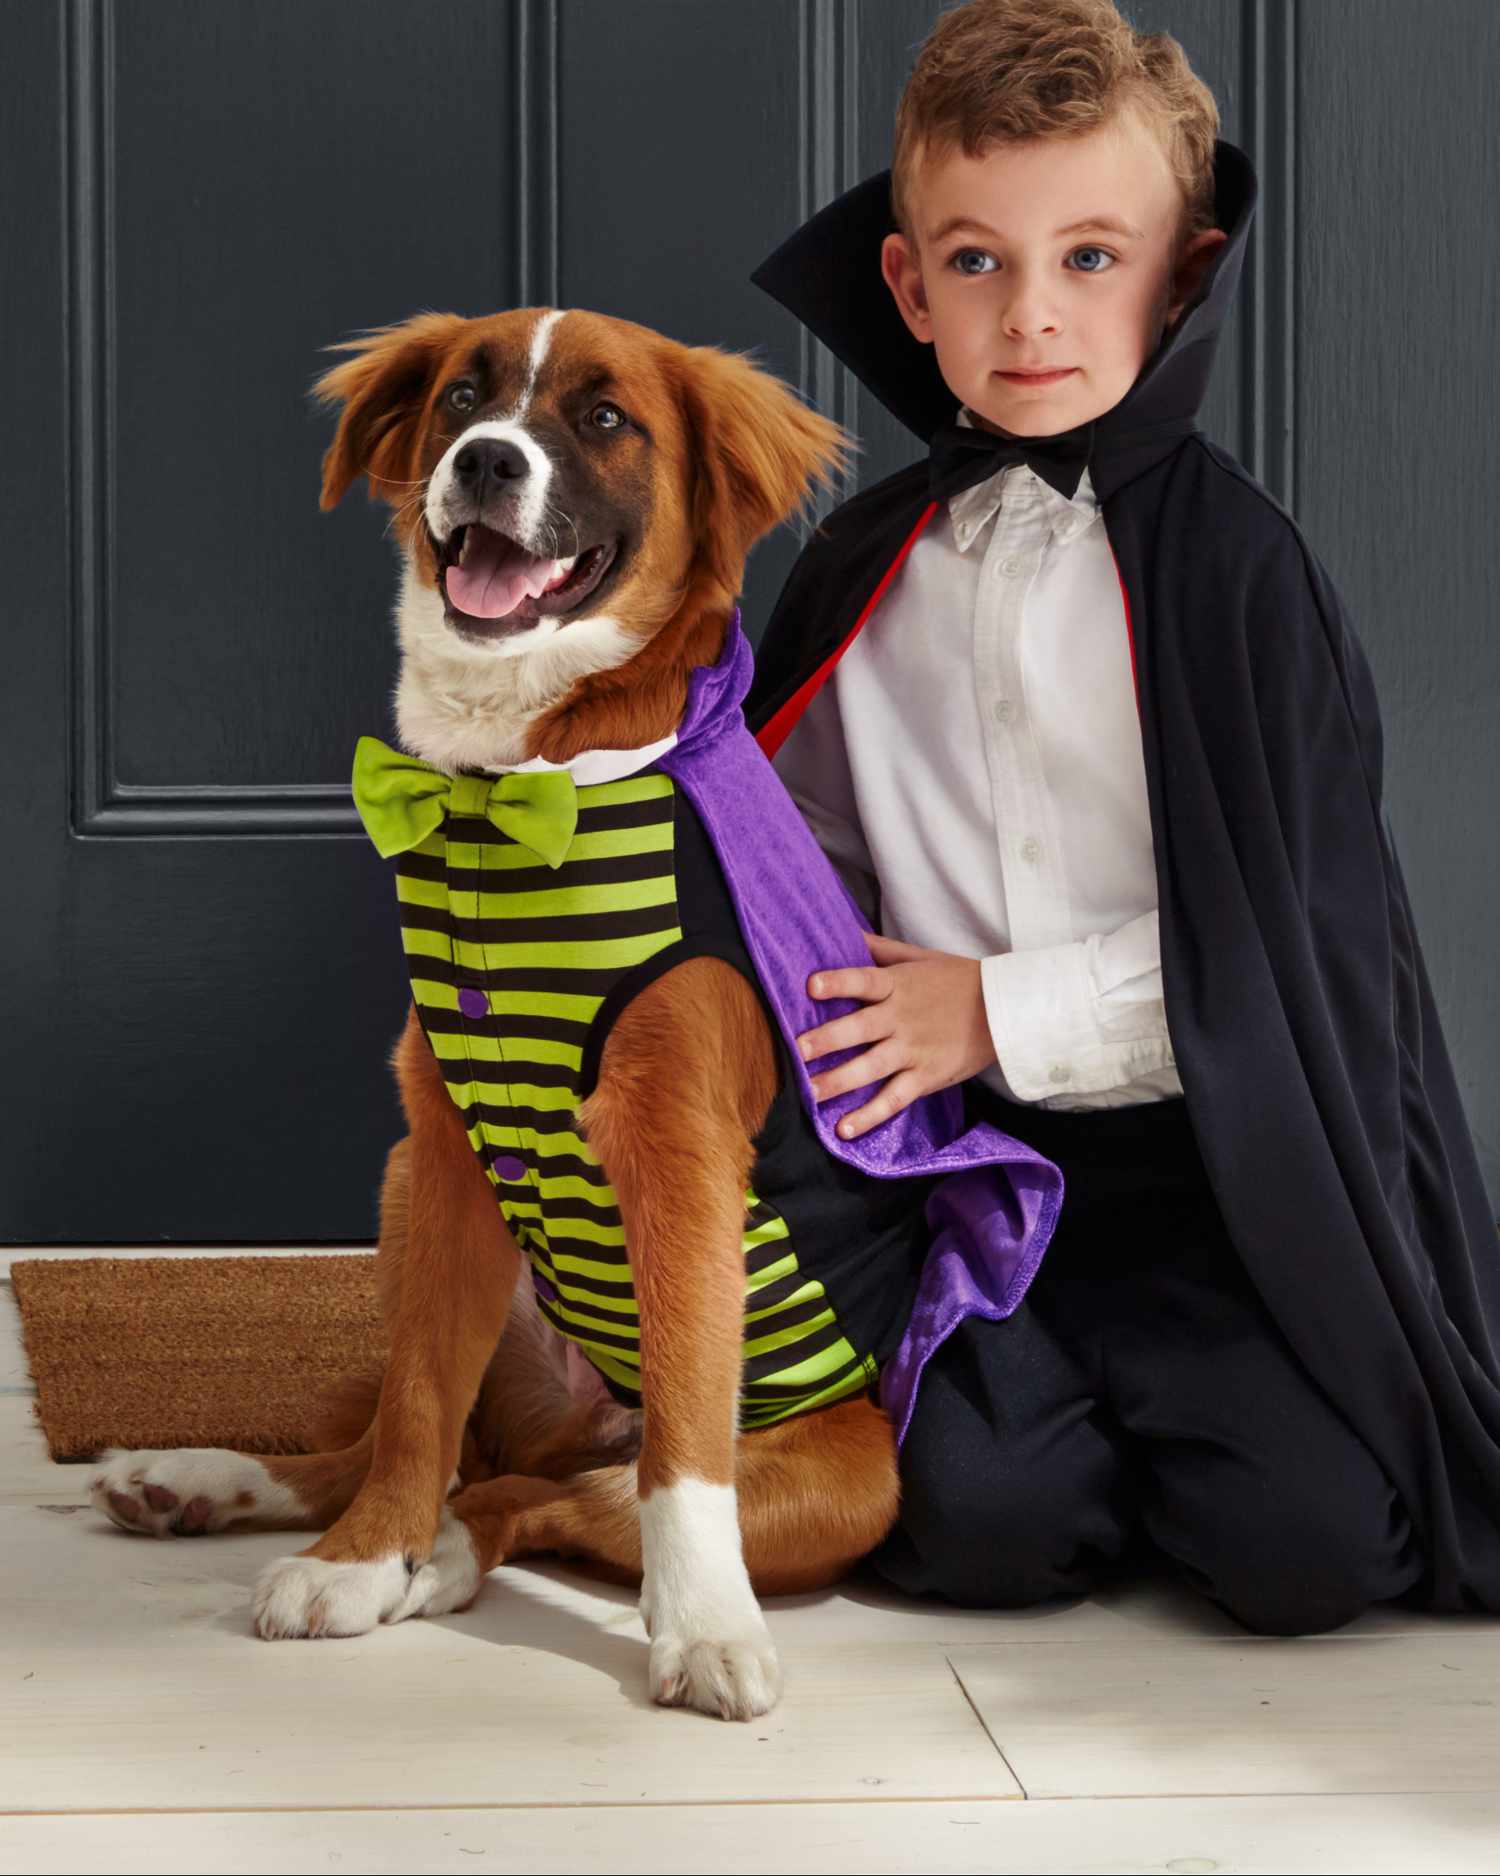 Matching Owner  and Dog  Costumes  for a Pet rifyingly Cute 